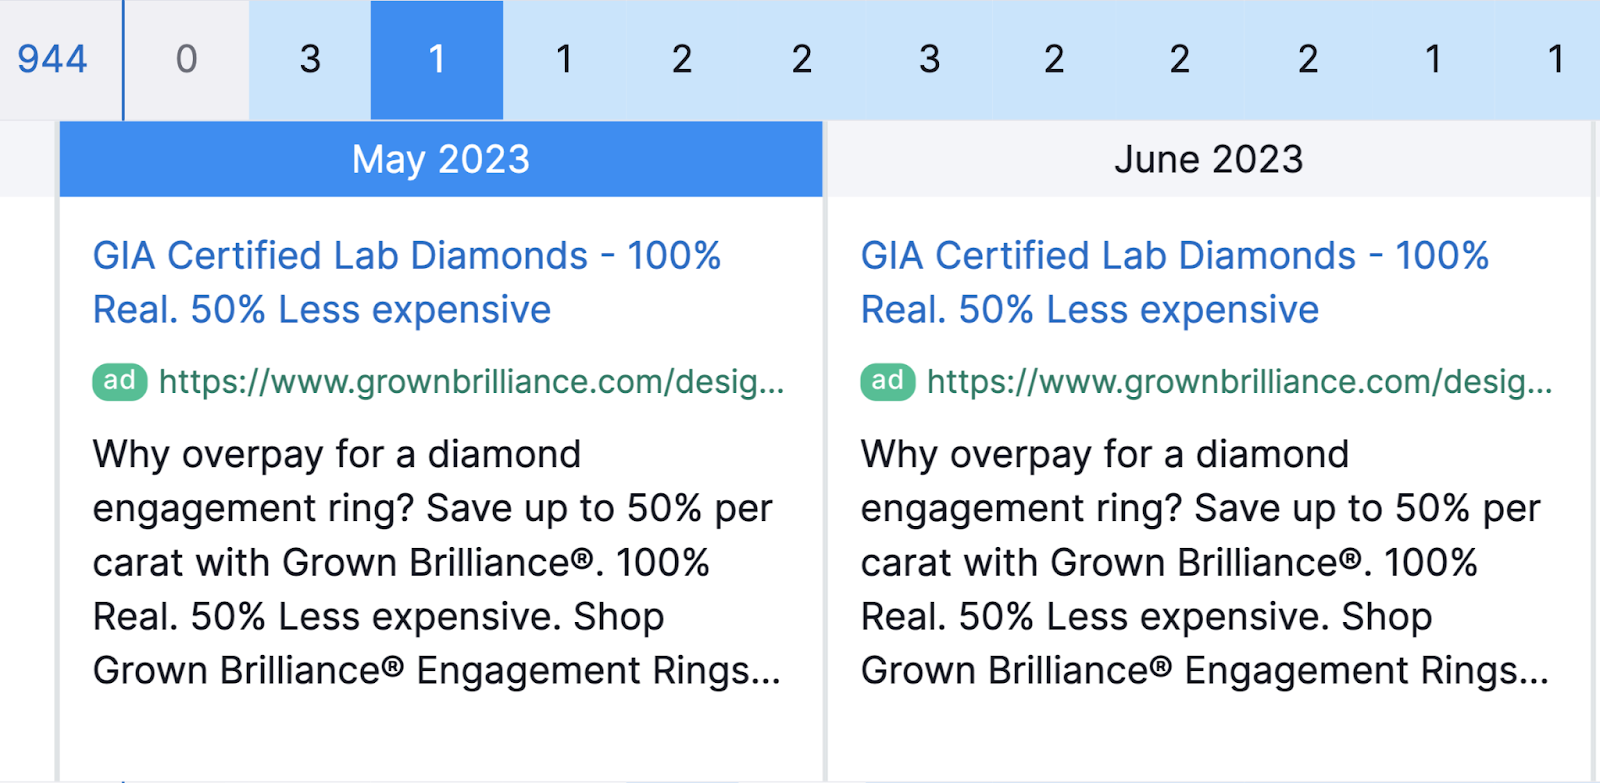 A box below a "1" shows a diamond rings ad. It includes a title, URL, and description.